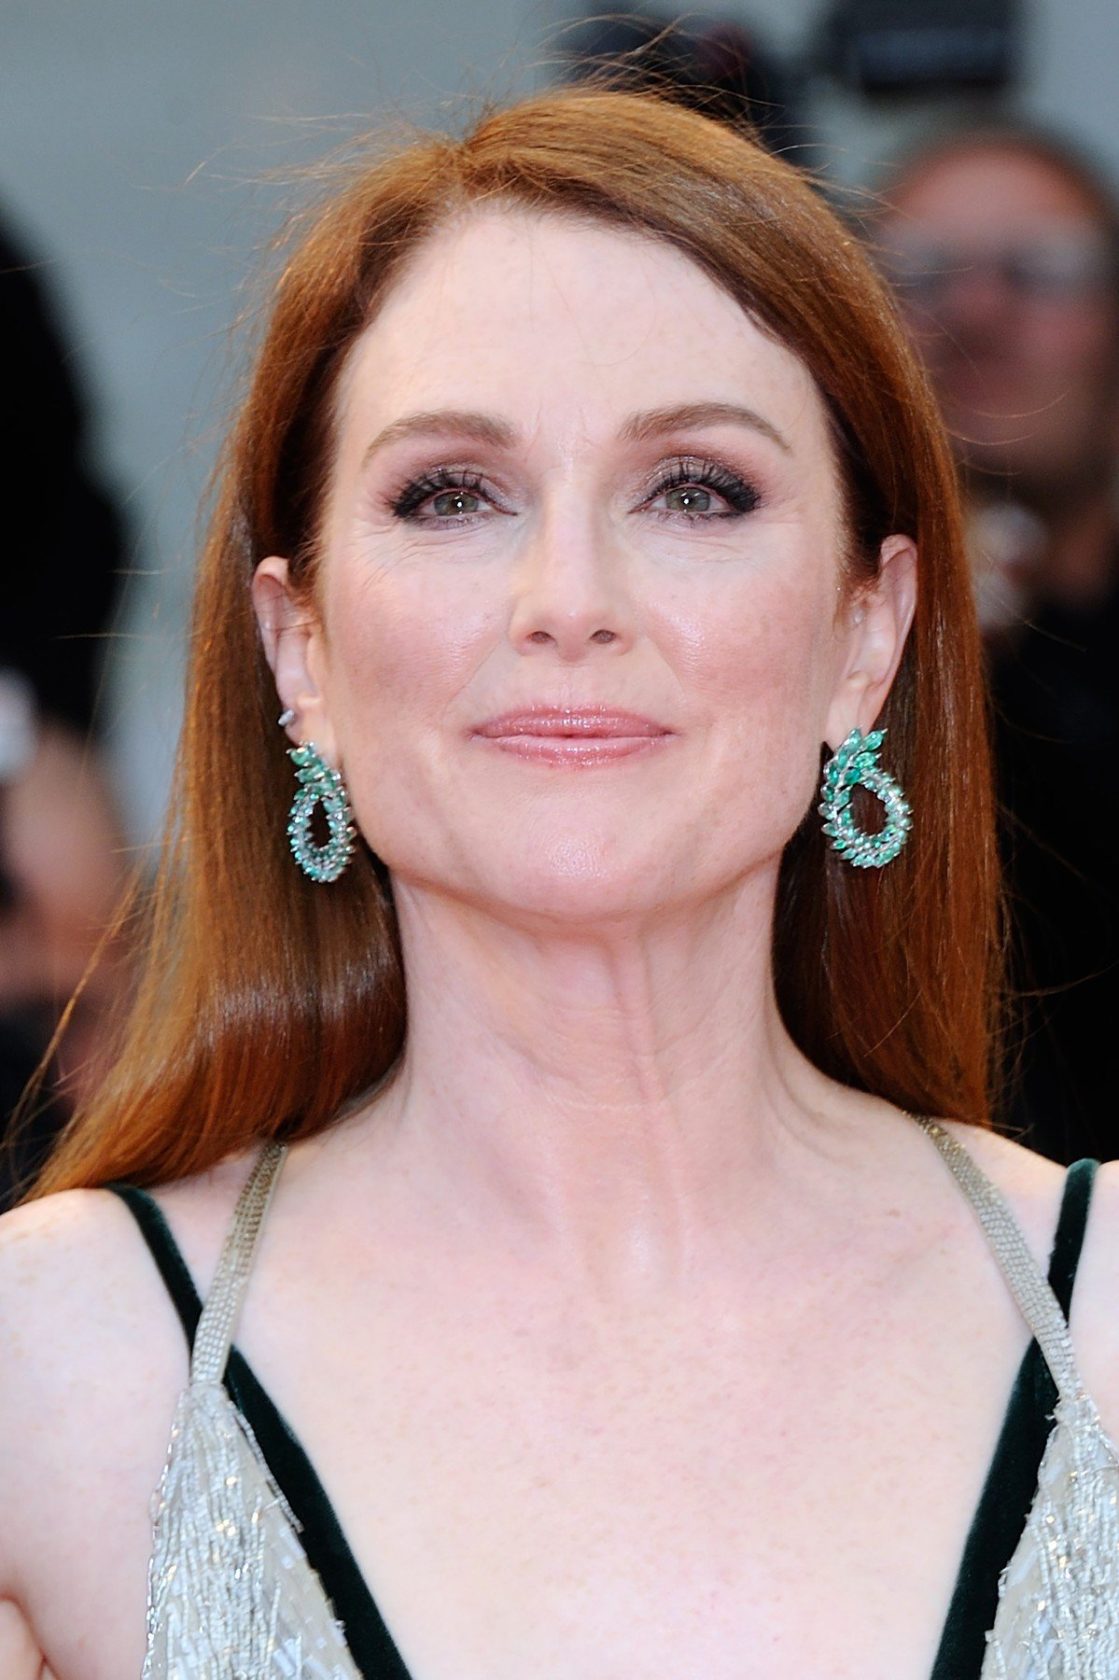 Julianne Moore attending the Suburbicon Premiere during the 74th Venice International Film Festival (Mostra di Venezia) at the Lido, Venice, Italy on September 02, 2017., Image: 348140507, License: Rights-managed, Restrictions: , Model Release: no, Credit line: Profimedia, Abaca